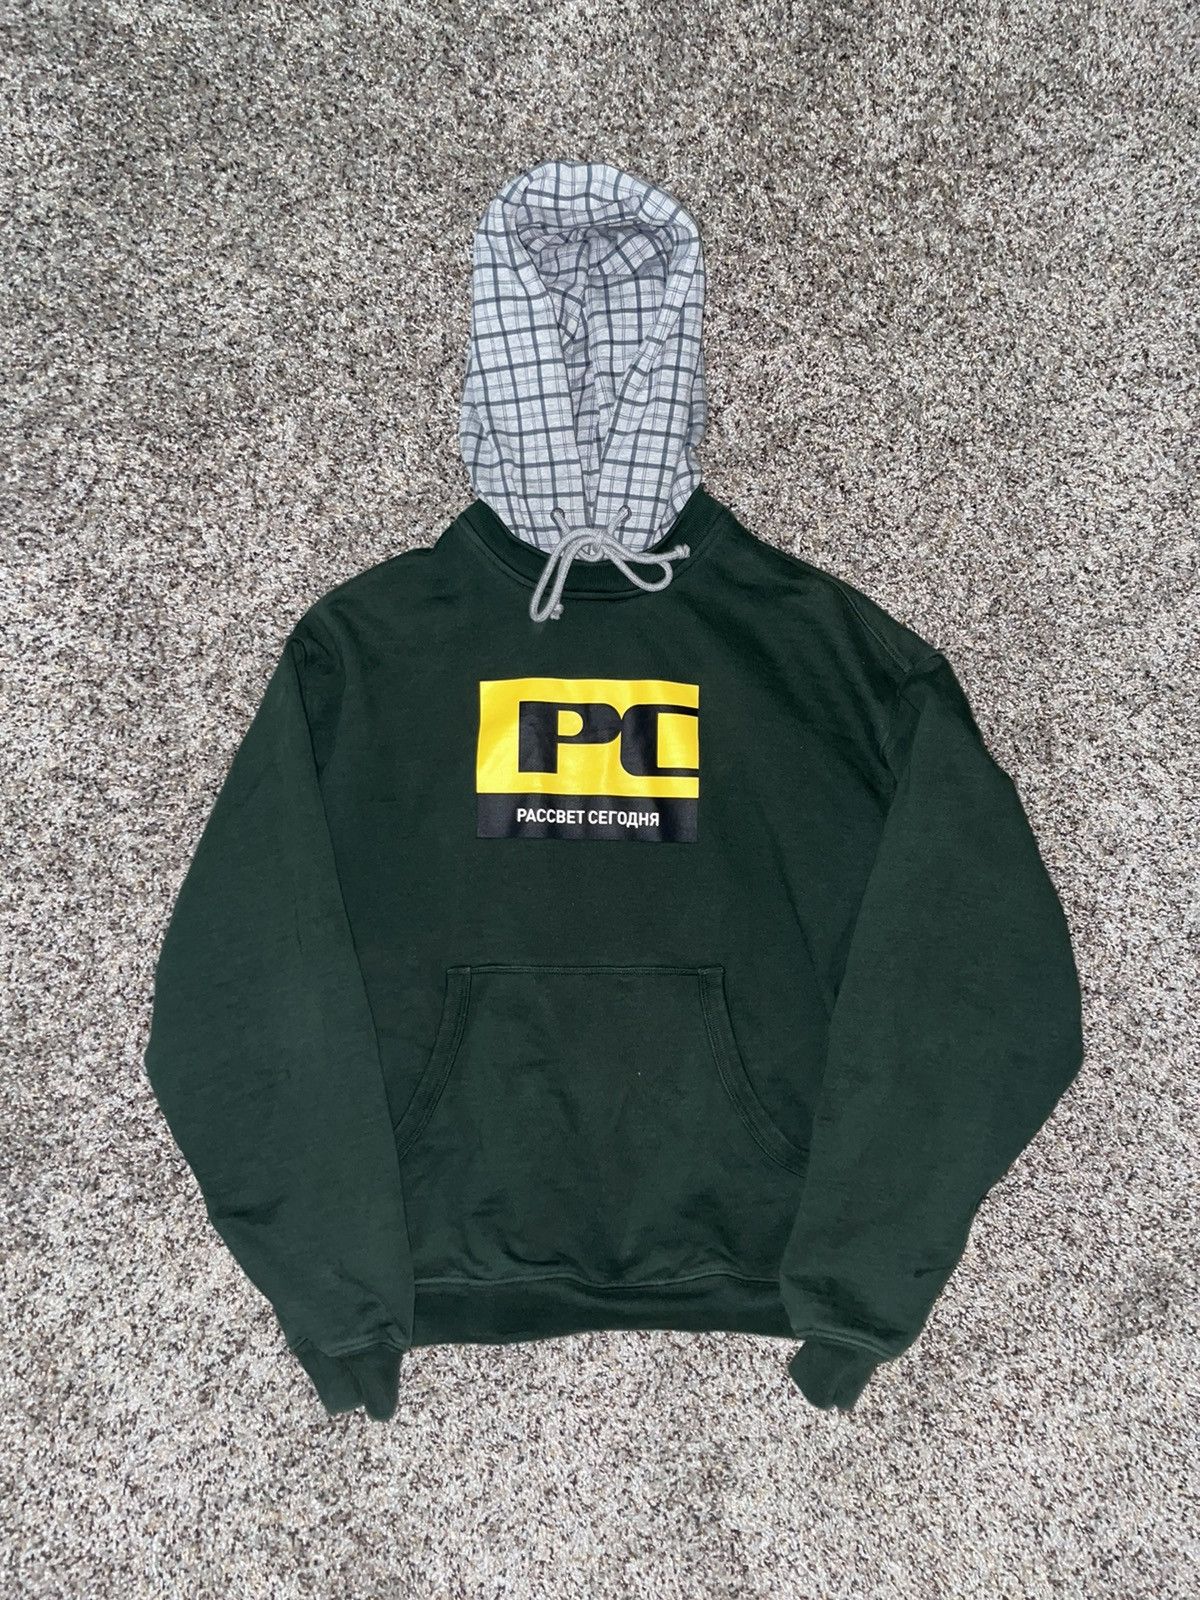 PACCBET PACCBET hoodie Size US M / EU 48-50 / 2 - 1 Preview